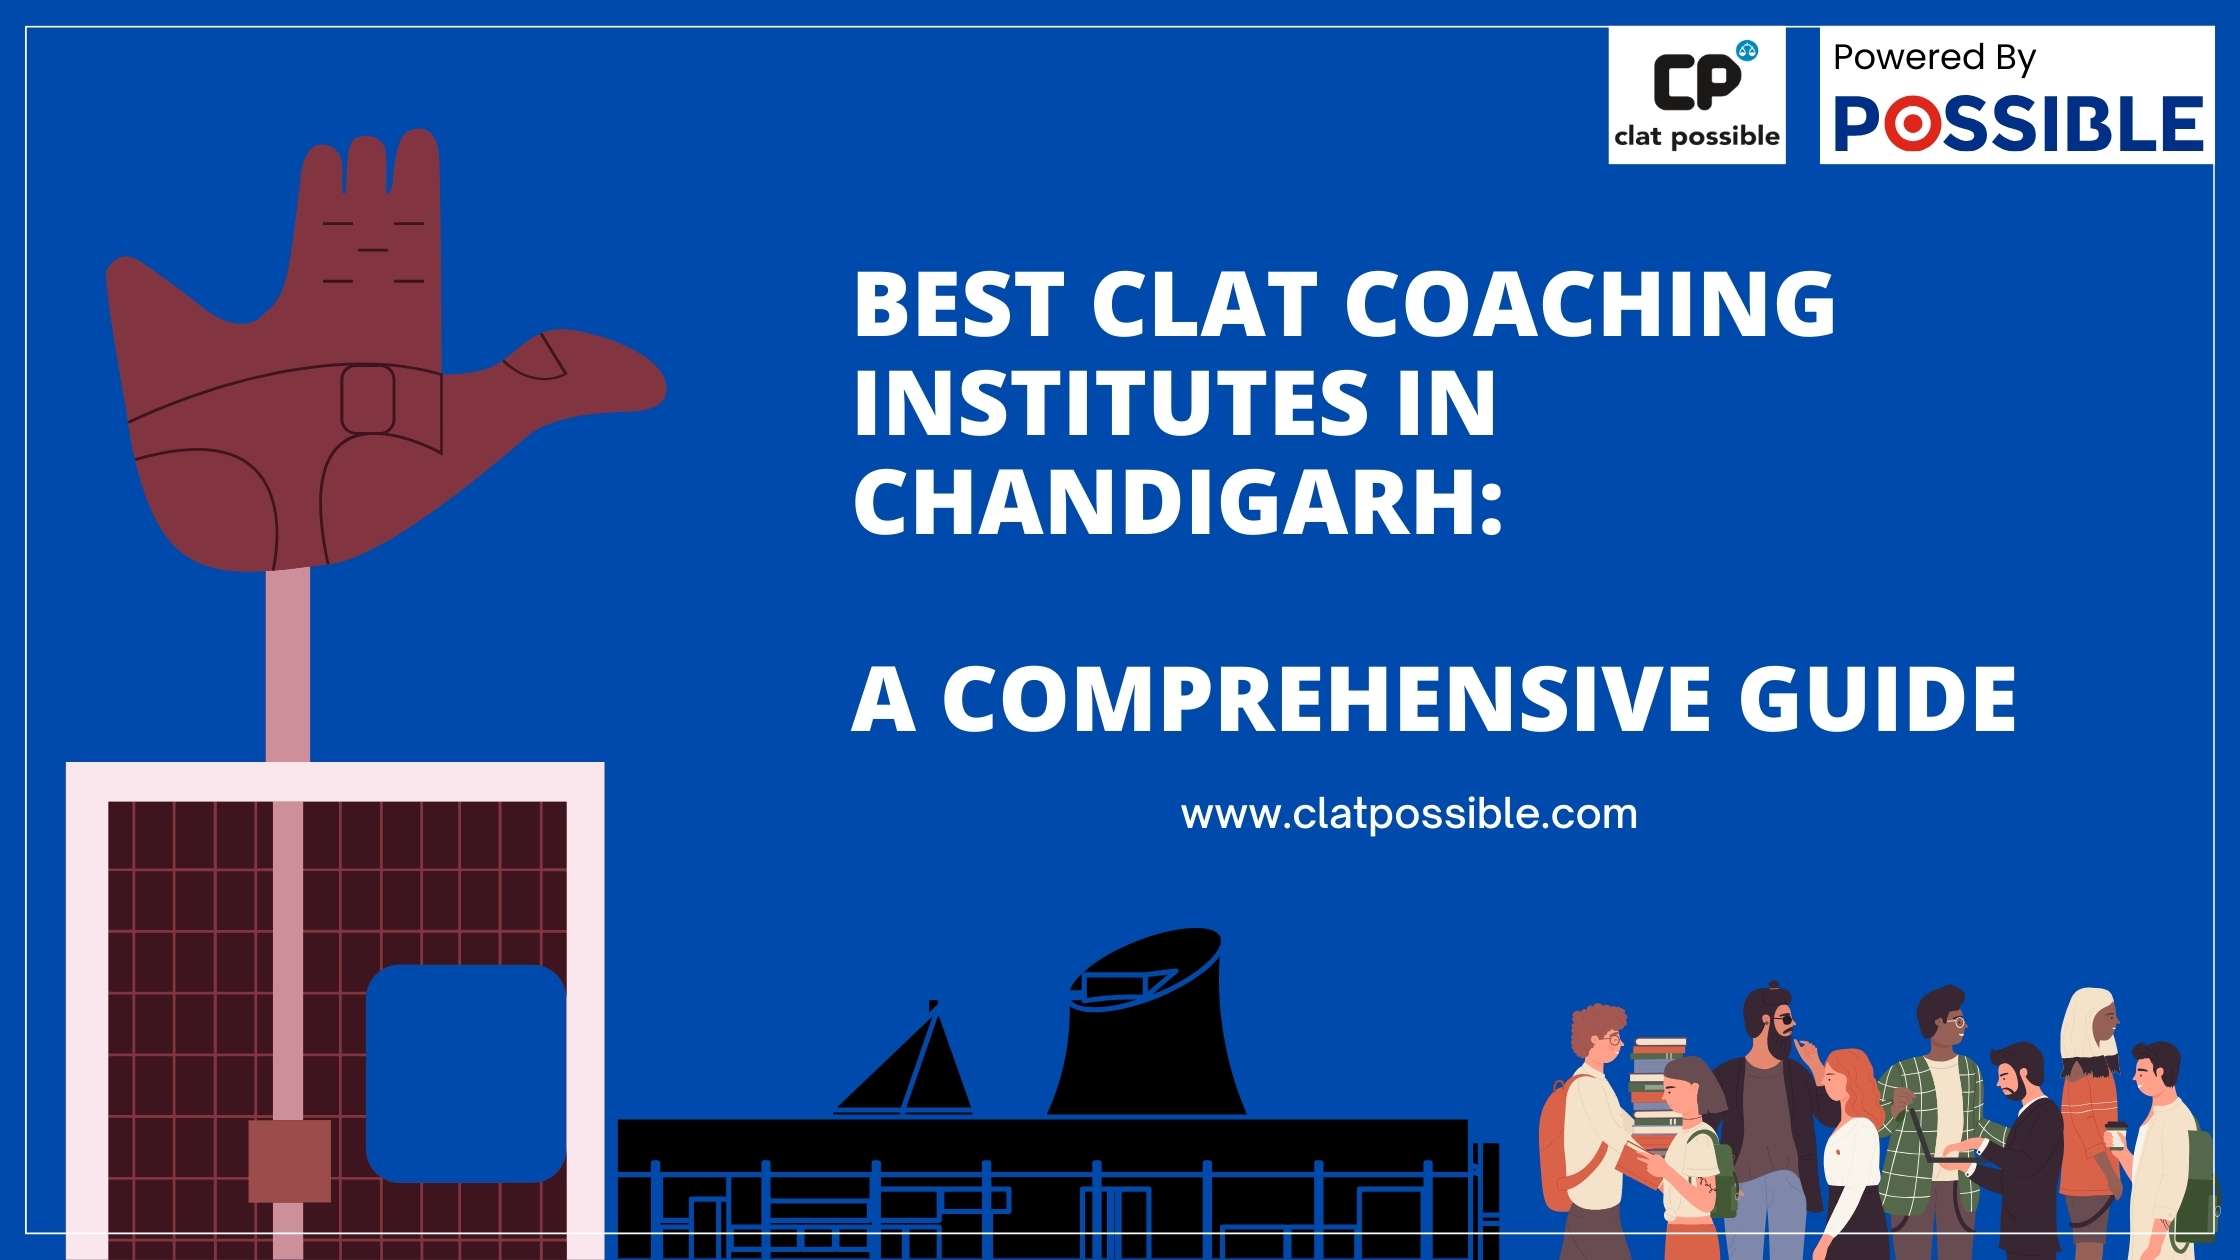 Best CLAT Coaching Institutes in Chandigarh: A Comprehensive Guide